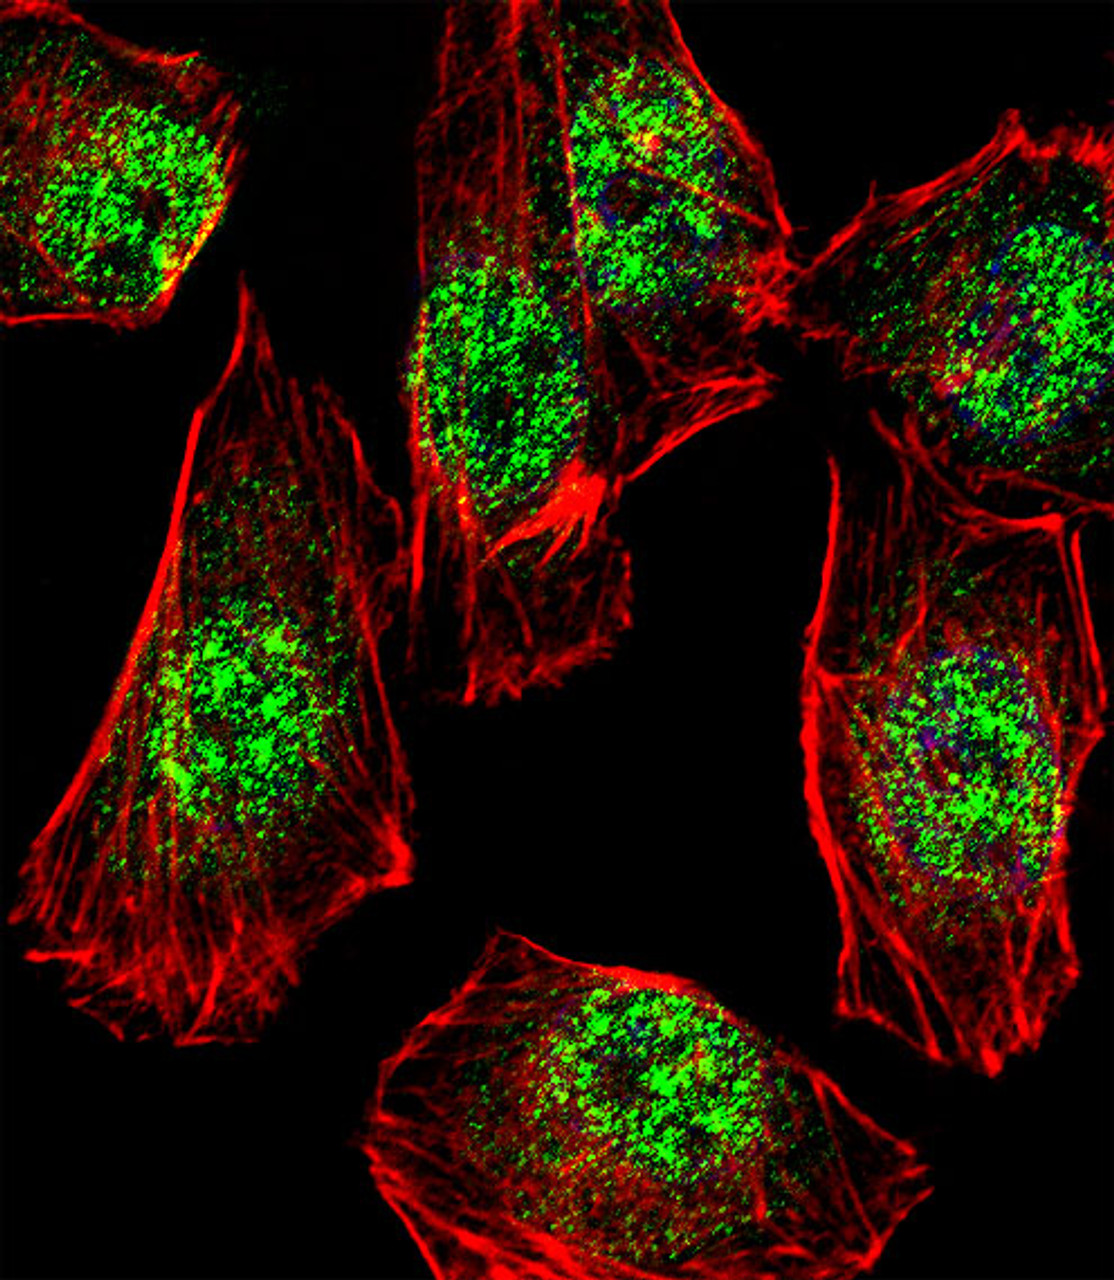 Fluorescent confocal image of A549 cell stained with RHOXF2B Antibody .A549 cells were fixed with 4% PFA (20 min) , permeabilized with Triton X-100 (0.1%, 10 min) , then incubated with RHOXF2B primary antibody (1:25) . For secondary antibody, Alexa Fluor 488 conjugated donkey anti-rabbit antibody (green) was used (1:400) .Cytoplasmic actin was counterstained with Alexa Fluor 555 (red) conjugated Phalloidin (7units/ml) . Nuclei were counterstained with DAPI (blue) (10 ug/ml, 10 min) .RHOXF2B immunoreactivity is localized to Nucleus significantly.